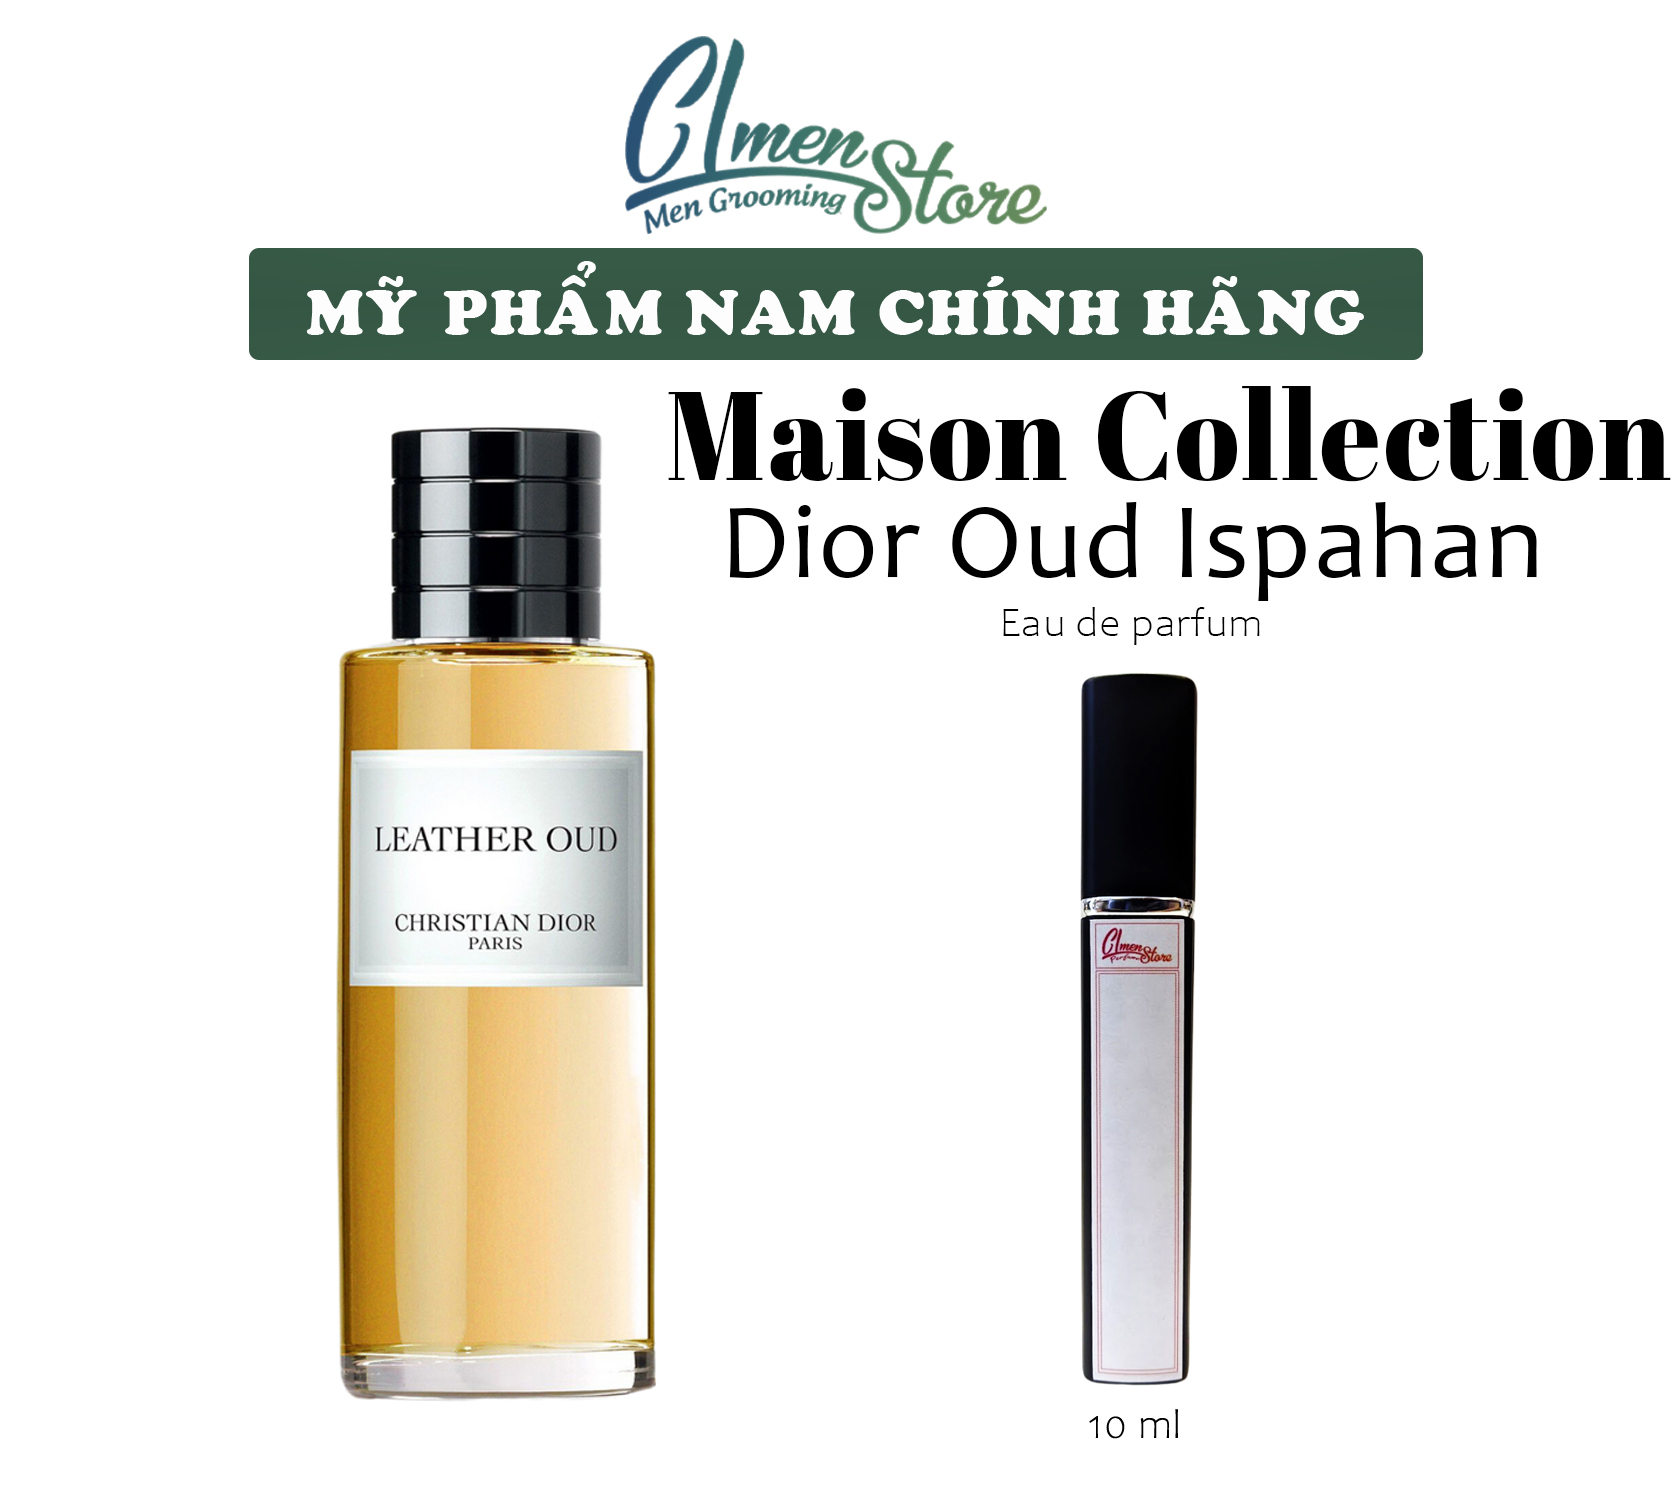 Review Leather Oud from Christian Dior and Absolue Pour Le Soir from  Maison Francis Kurkdjian 2010 